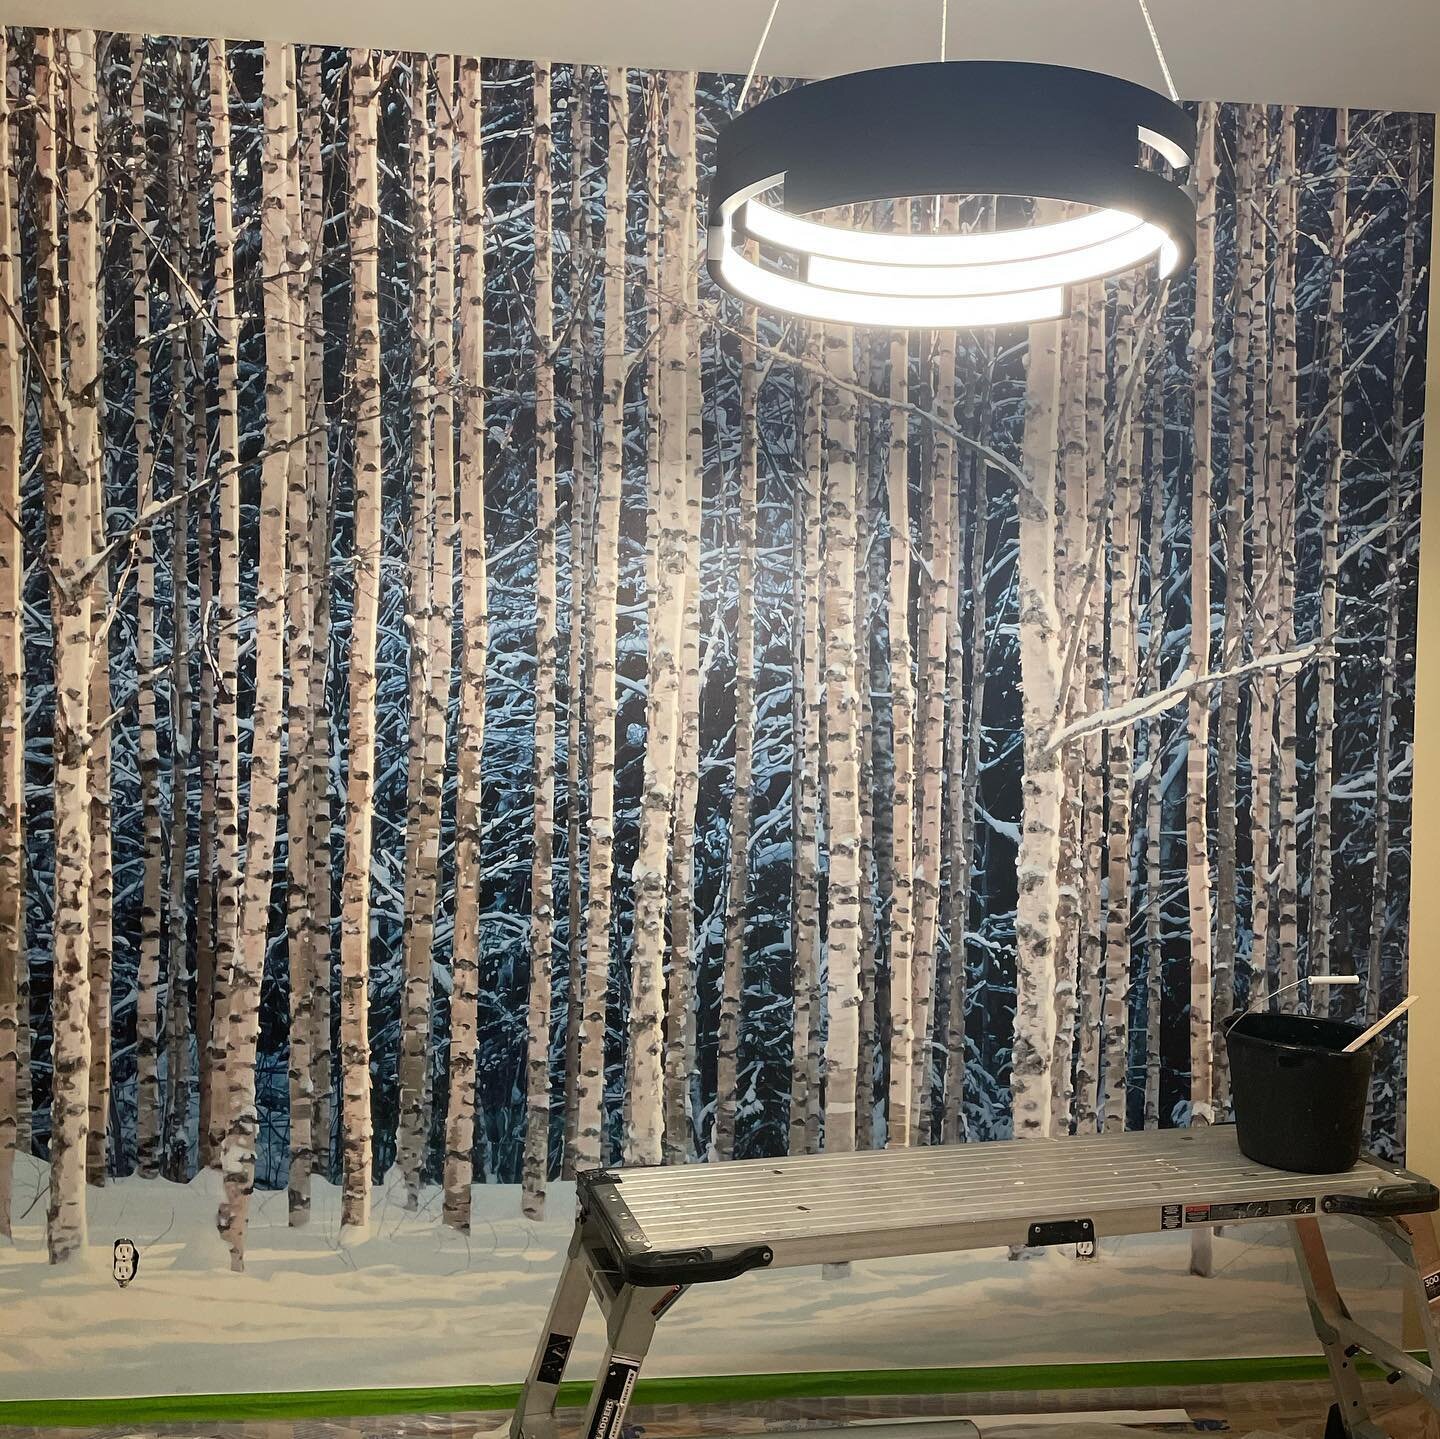 Did you know wallpaper is coming back? I was short on material but still managed to hide outlets. Fun accent wall #cloutierconstructionanddesign #accentwall #wallpaper #custom #birch #winter #buildersofinsta #keepcraftalive #livingthedream #hgtv